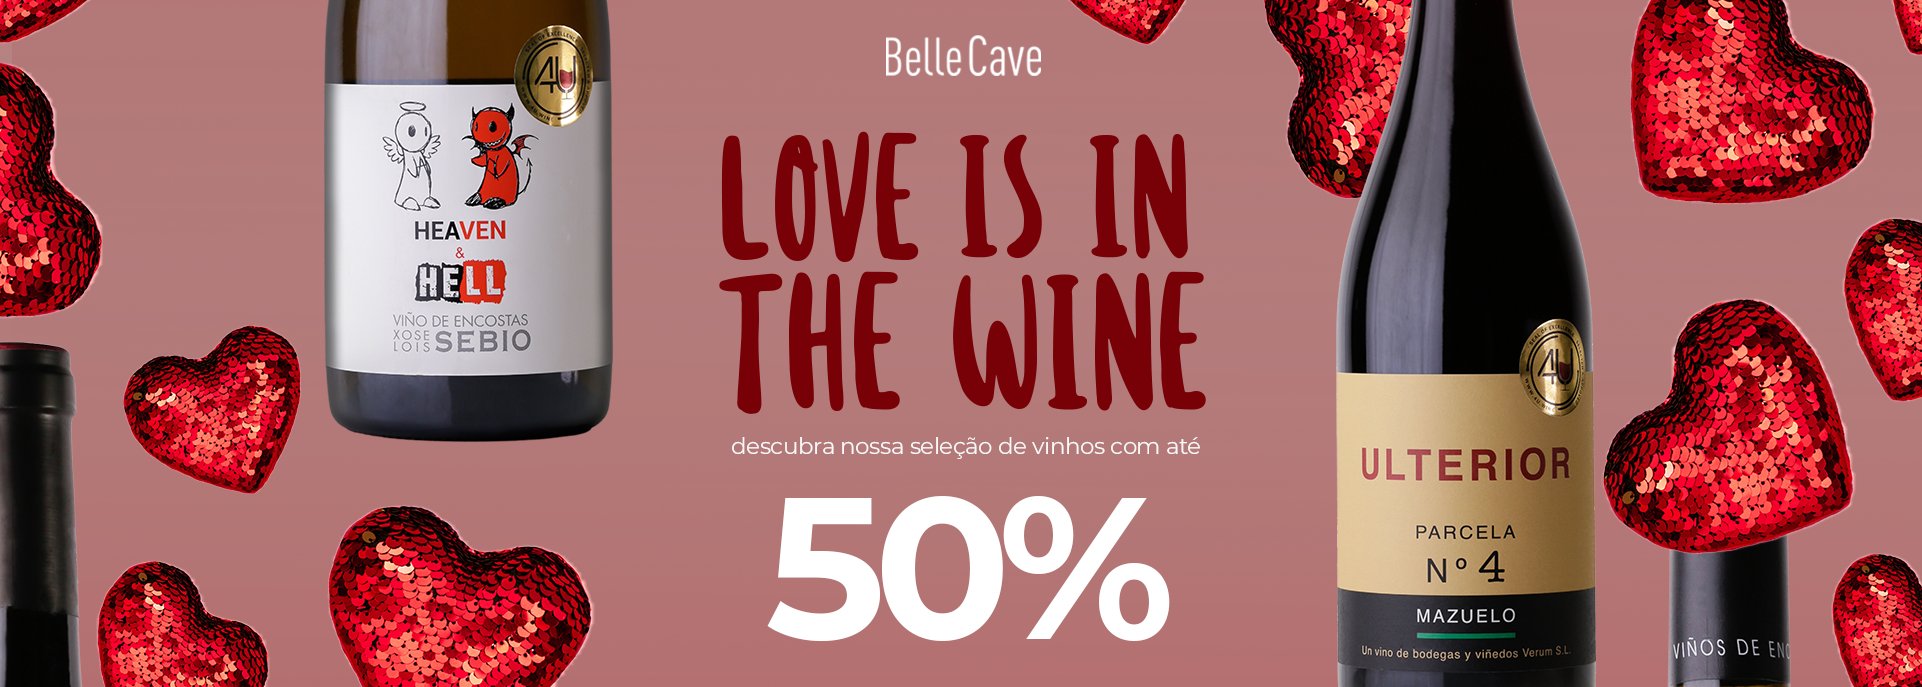 Love is in The Wine